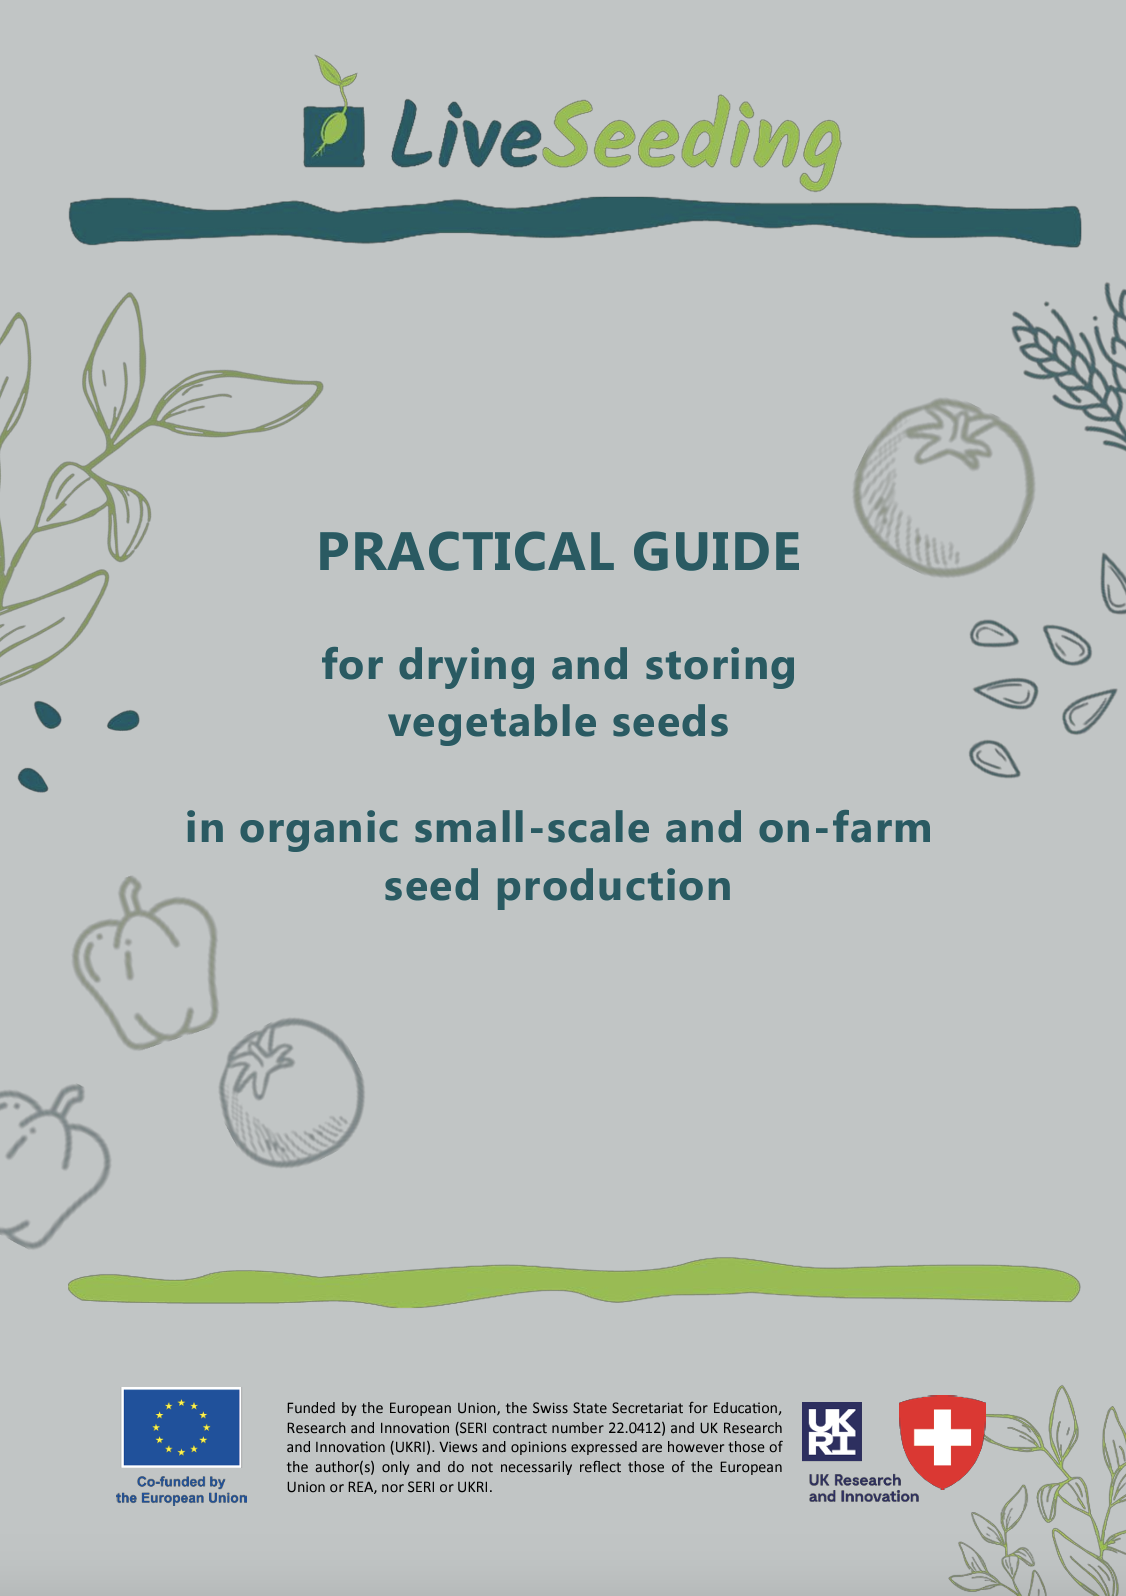 Practical Guide for drying and storing vegetable seeds in organic small-scale and on-farm seed production